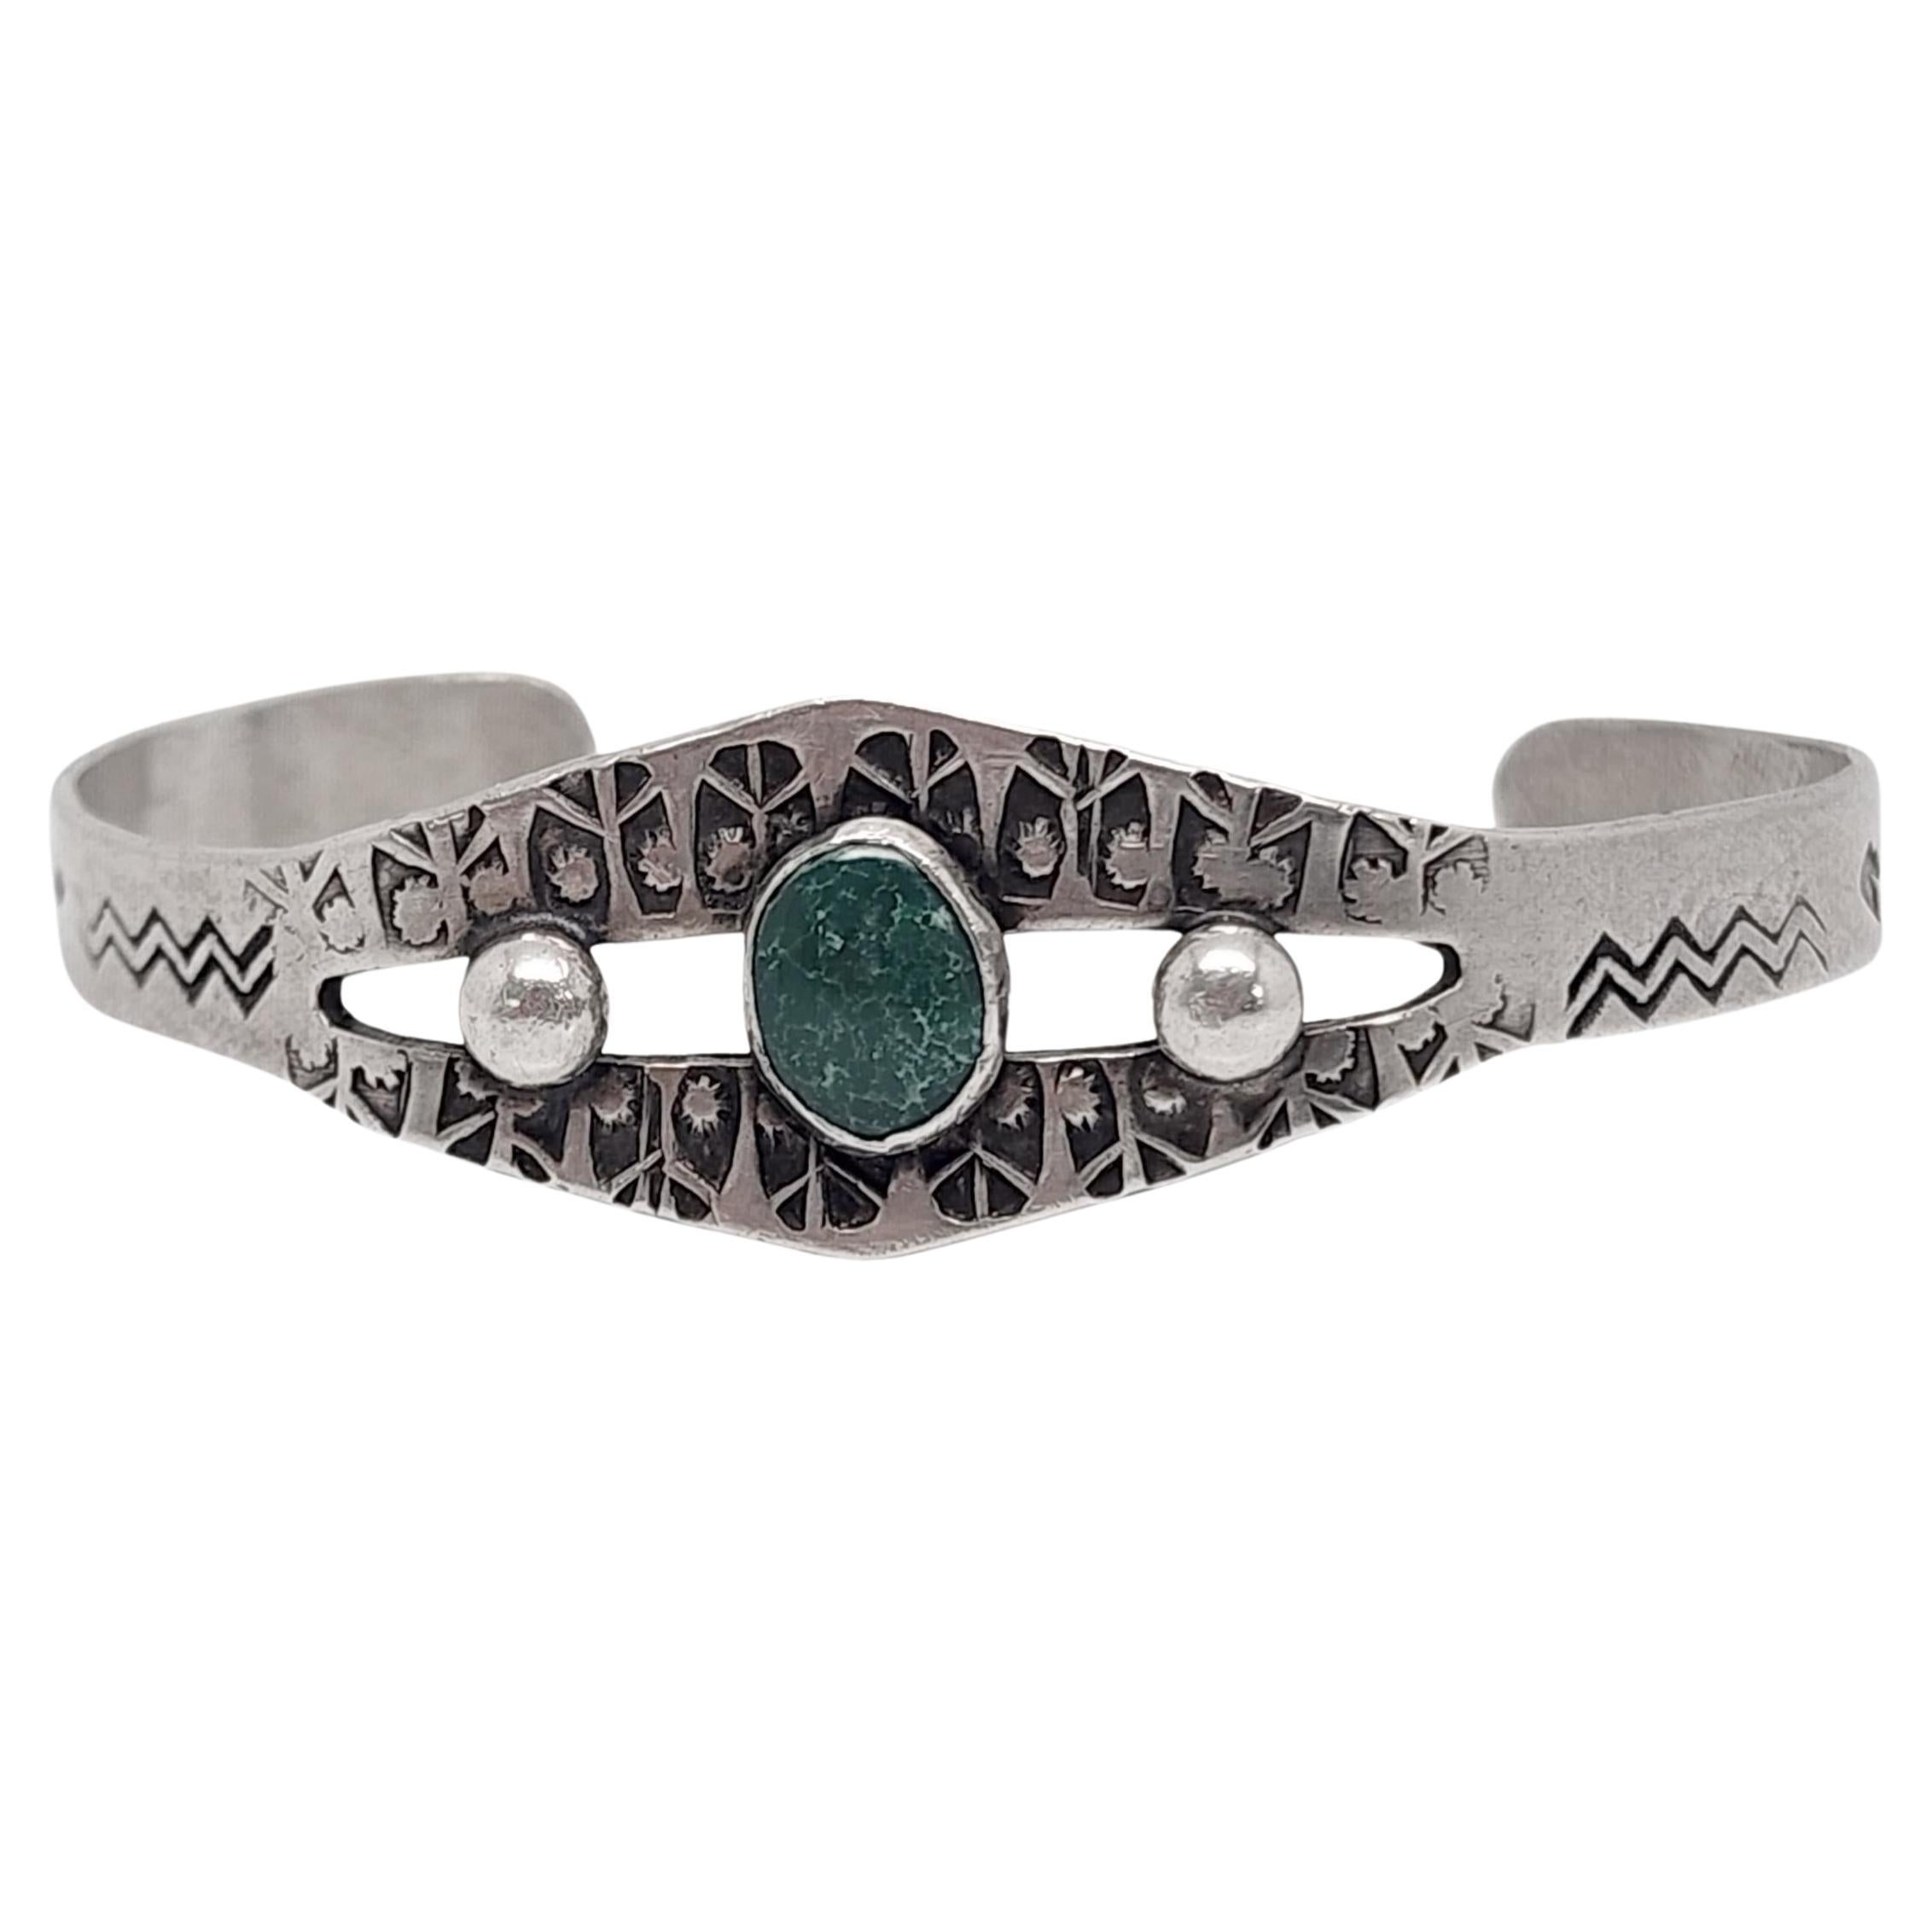 Fred Harvey Era Sterling Silver Green Turquoise Cuff Bracelet #15359 For Sale